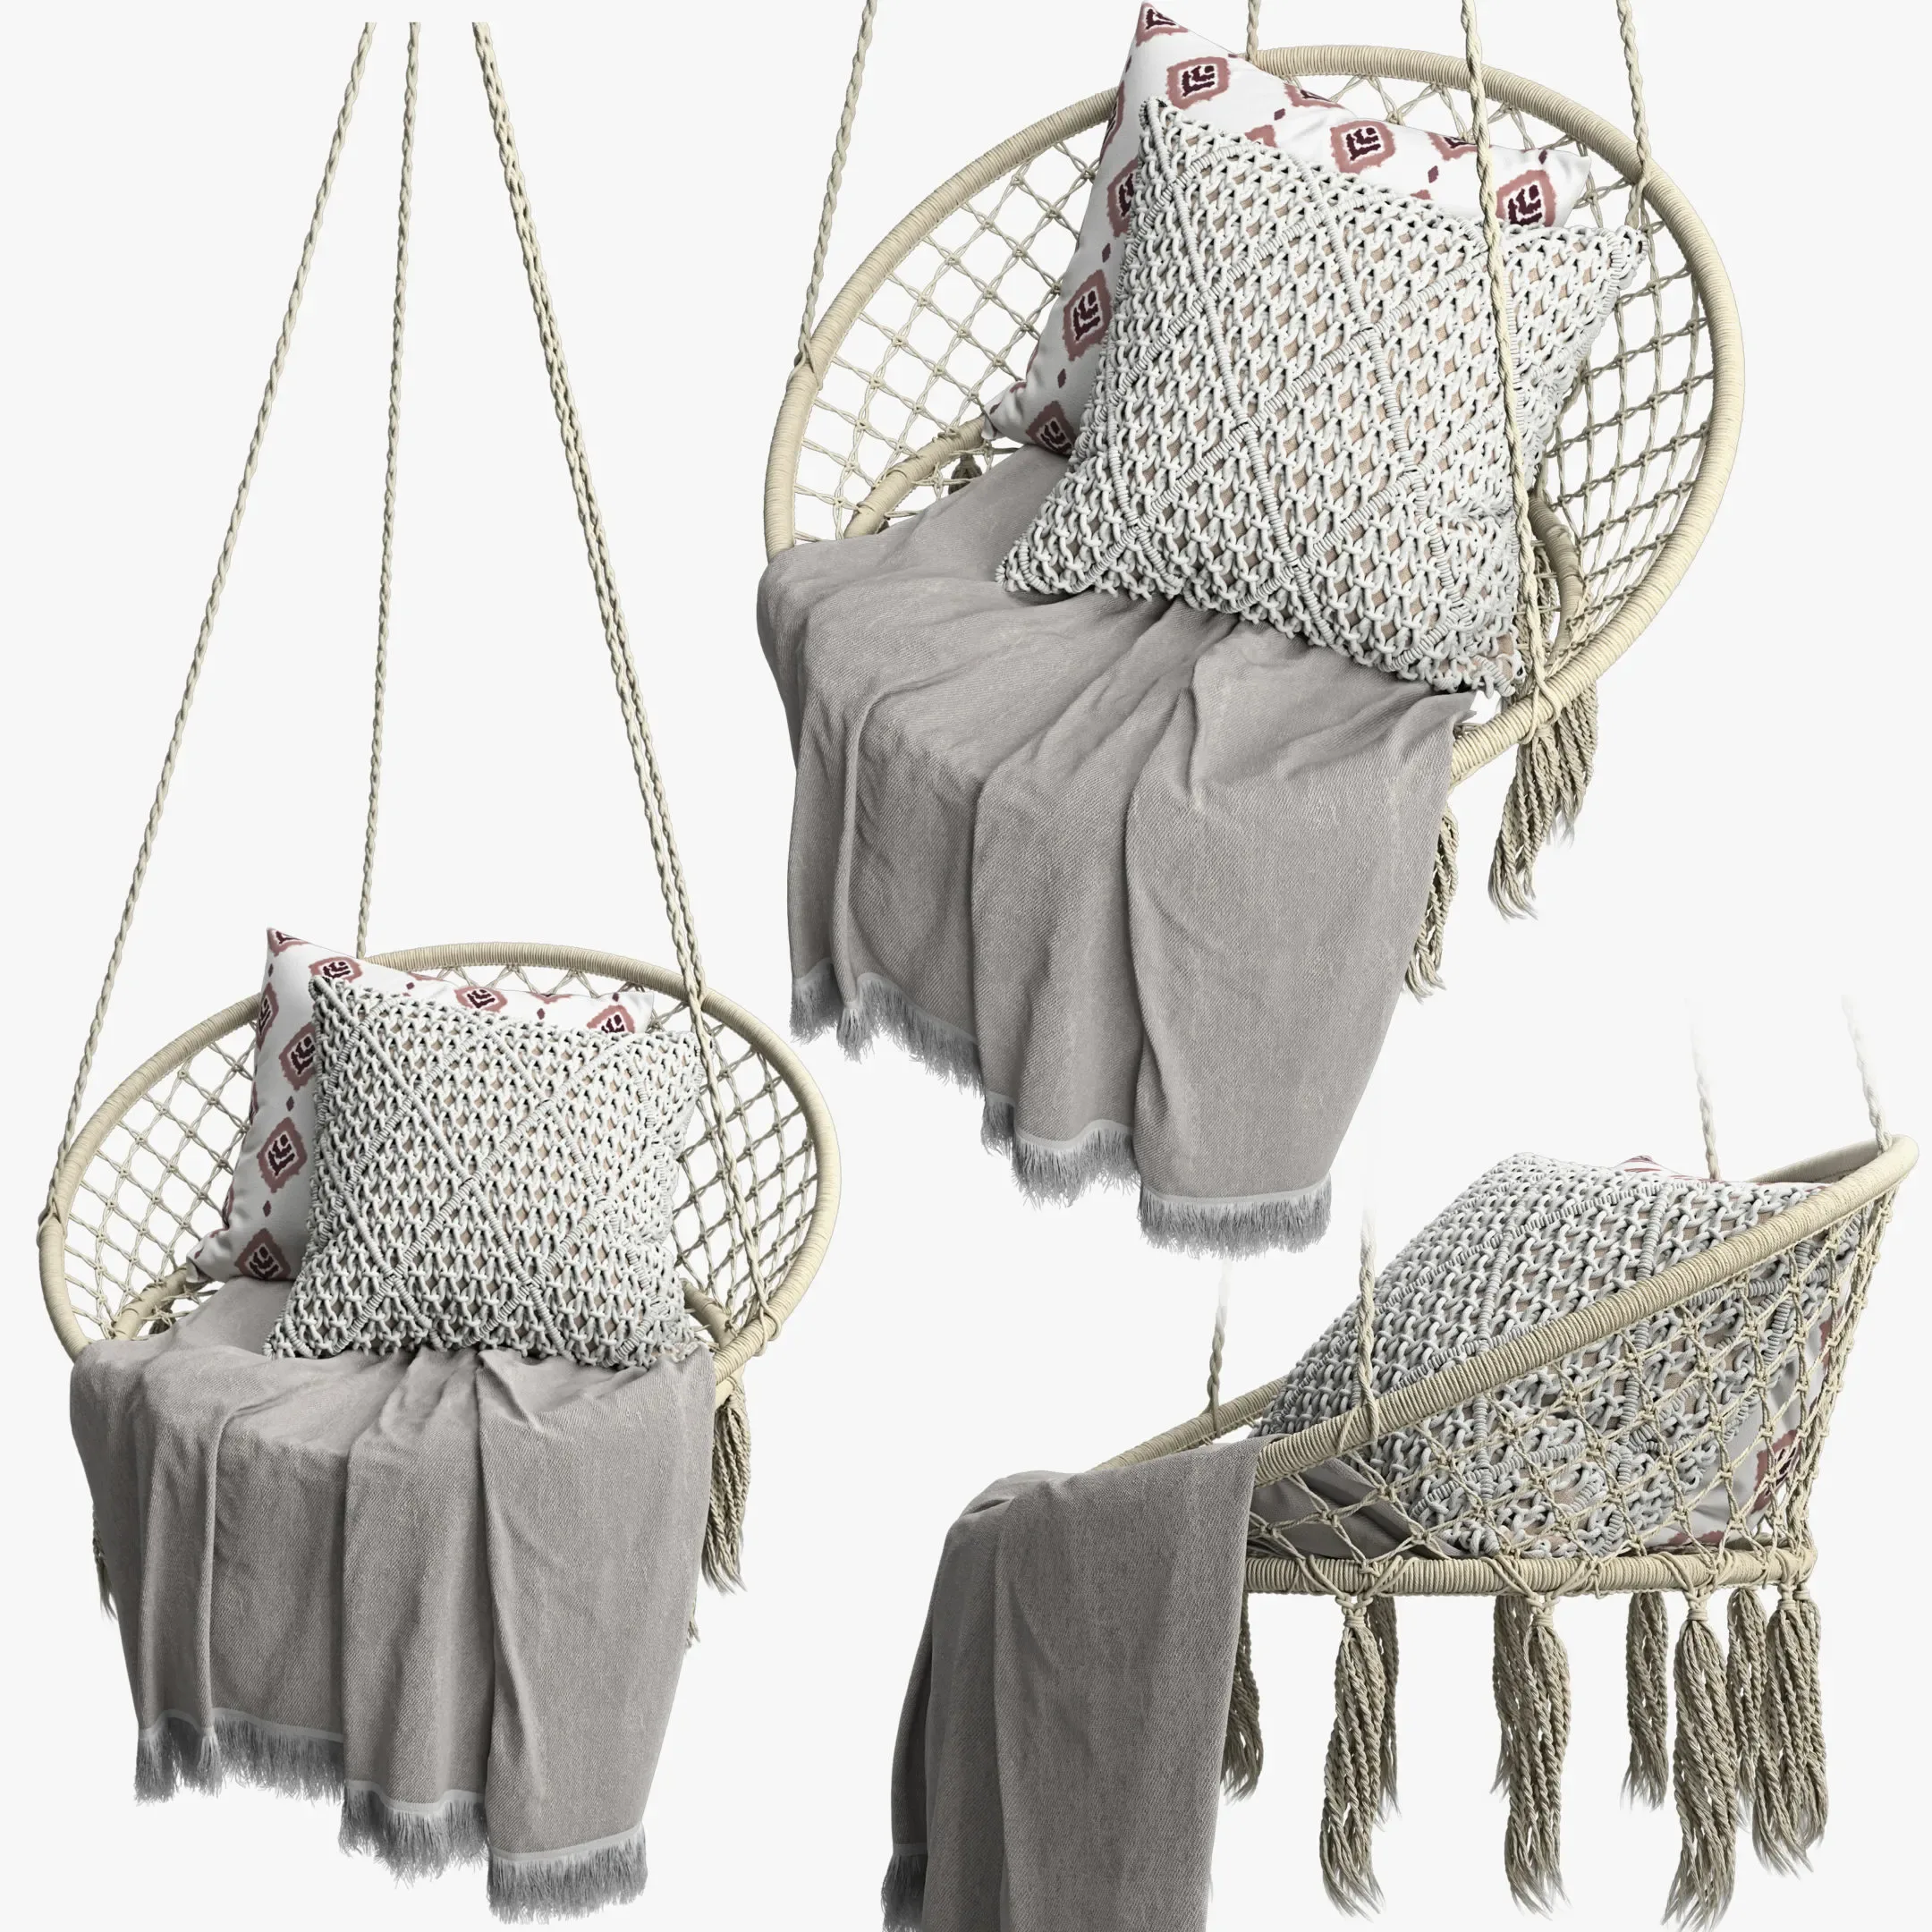 Butlers Paradise Now "Hammock Chair with Fringes"